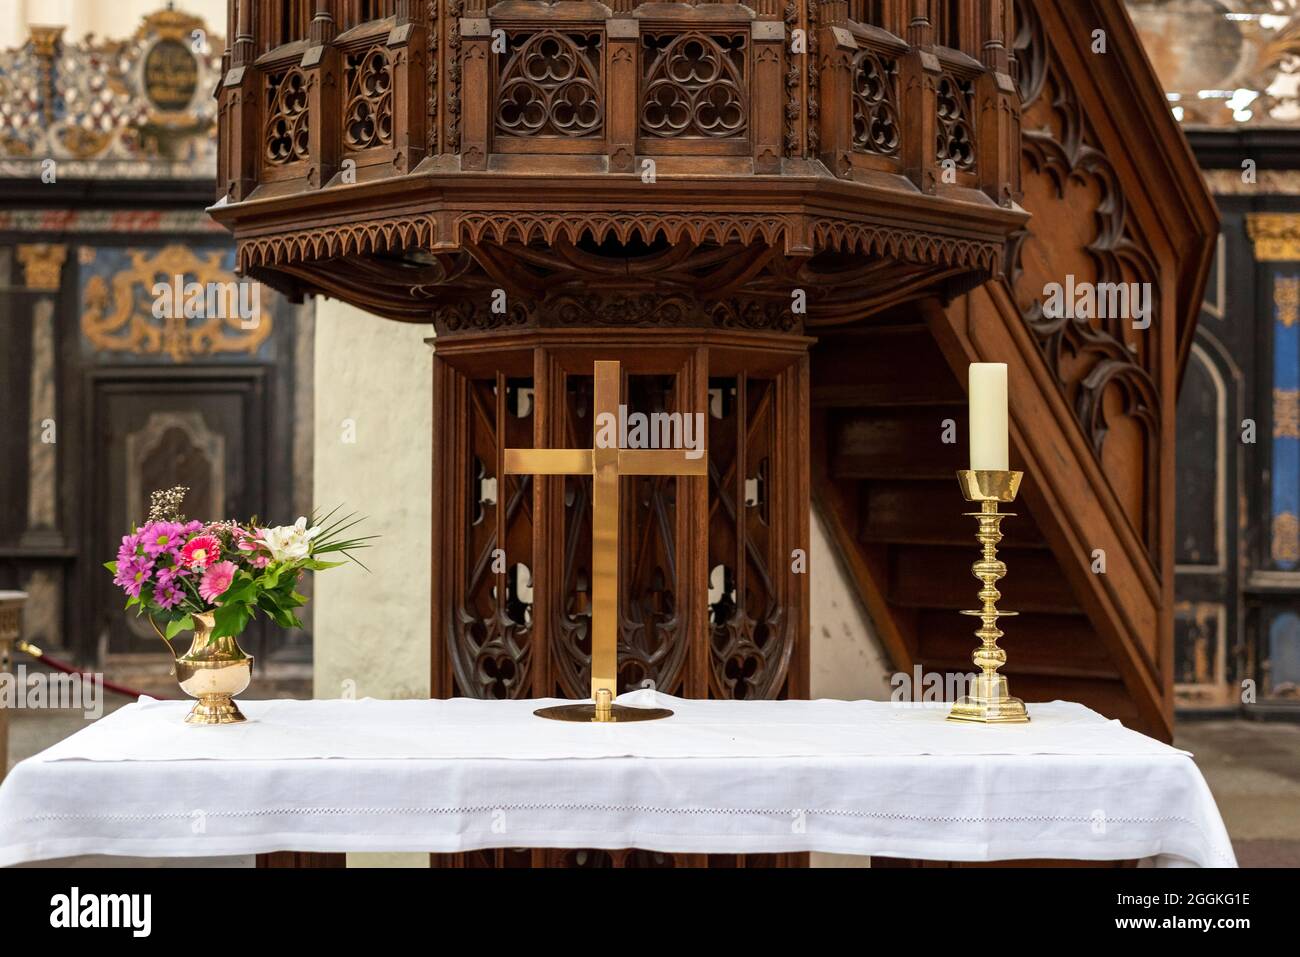 Germany, Mecklenburg-Western Pomerania, Stralsund, a cross stands in front of a pulpit in the Marienkirche in the Hanseatic city of Stralsund, Baltic Sea Stock Photo